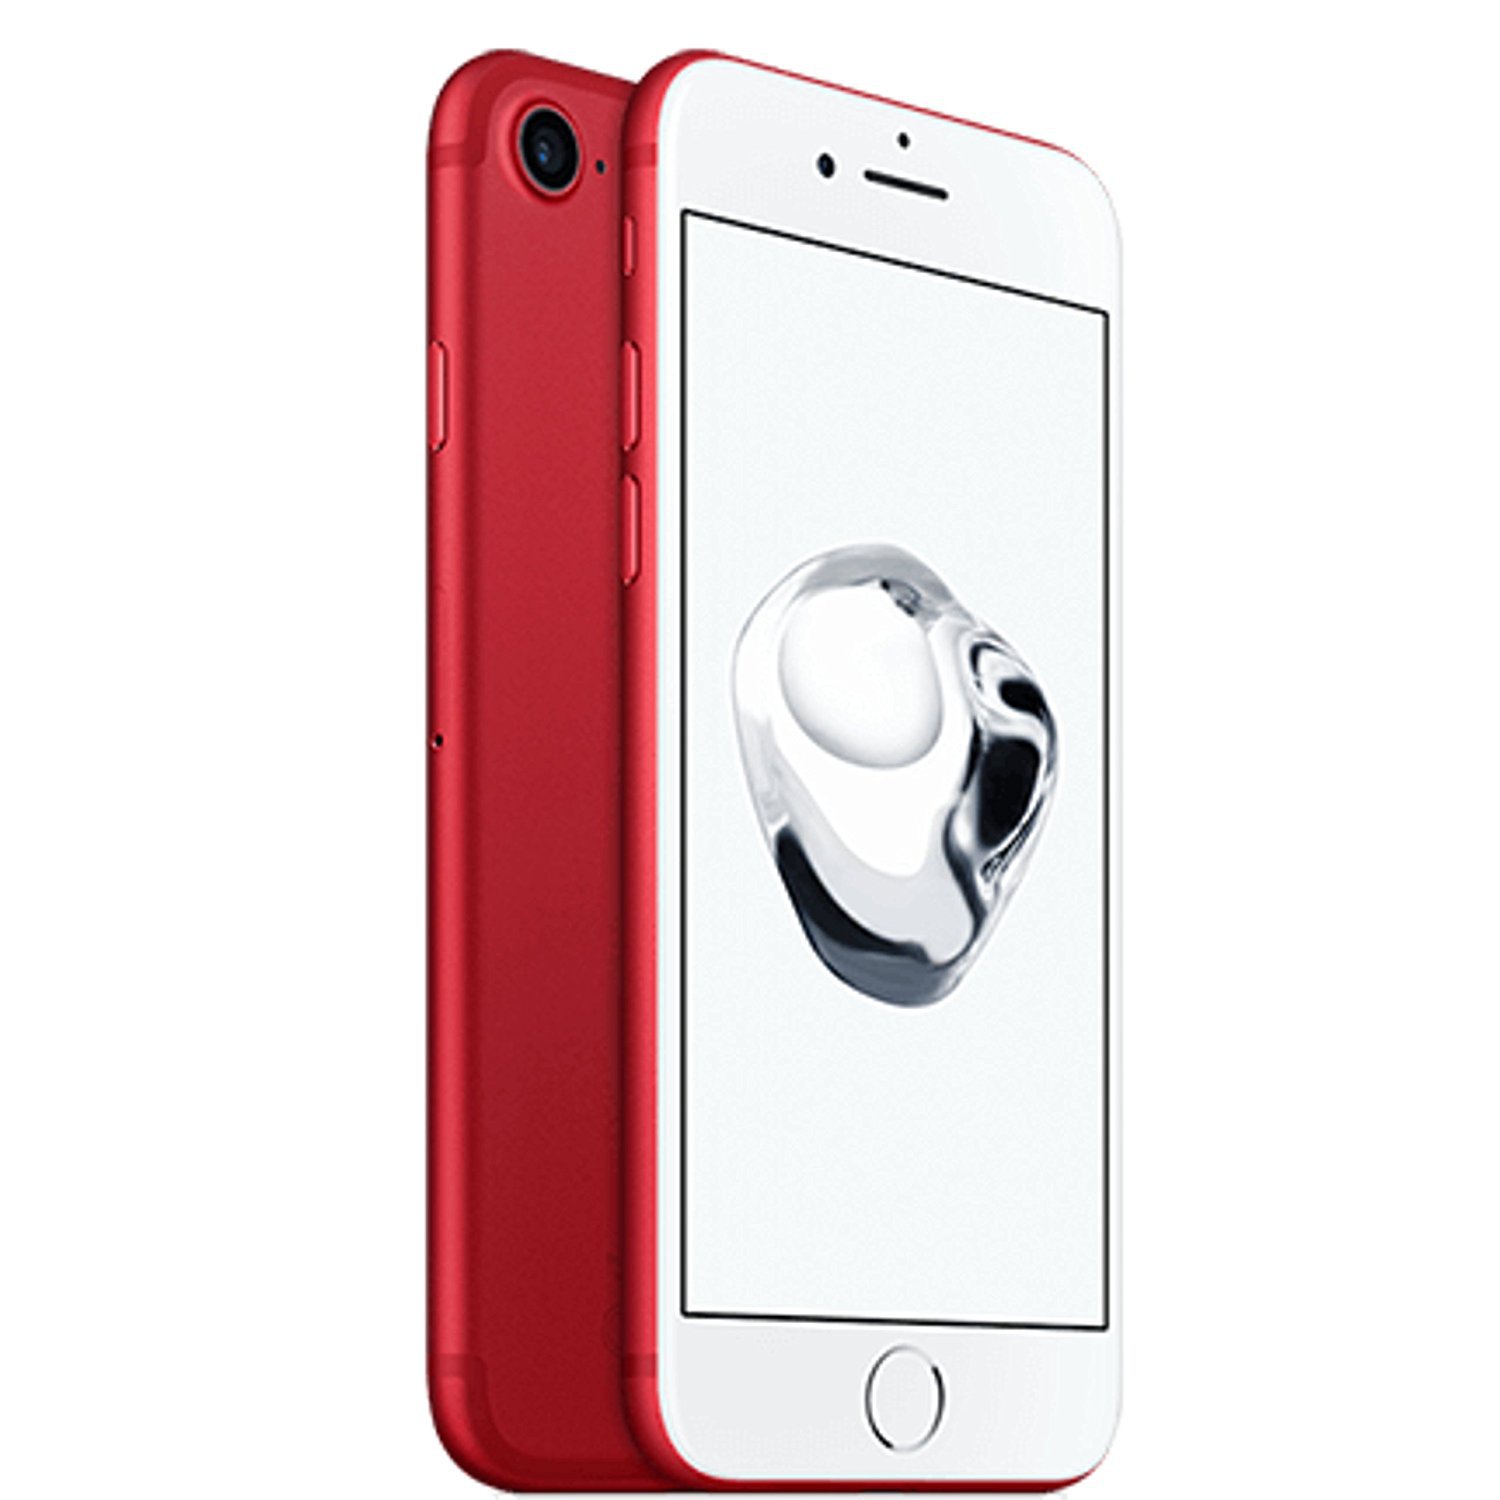 Apple Iphone 7 128gb Product Red Special Edition Usa Model Warranty